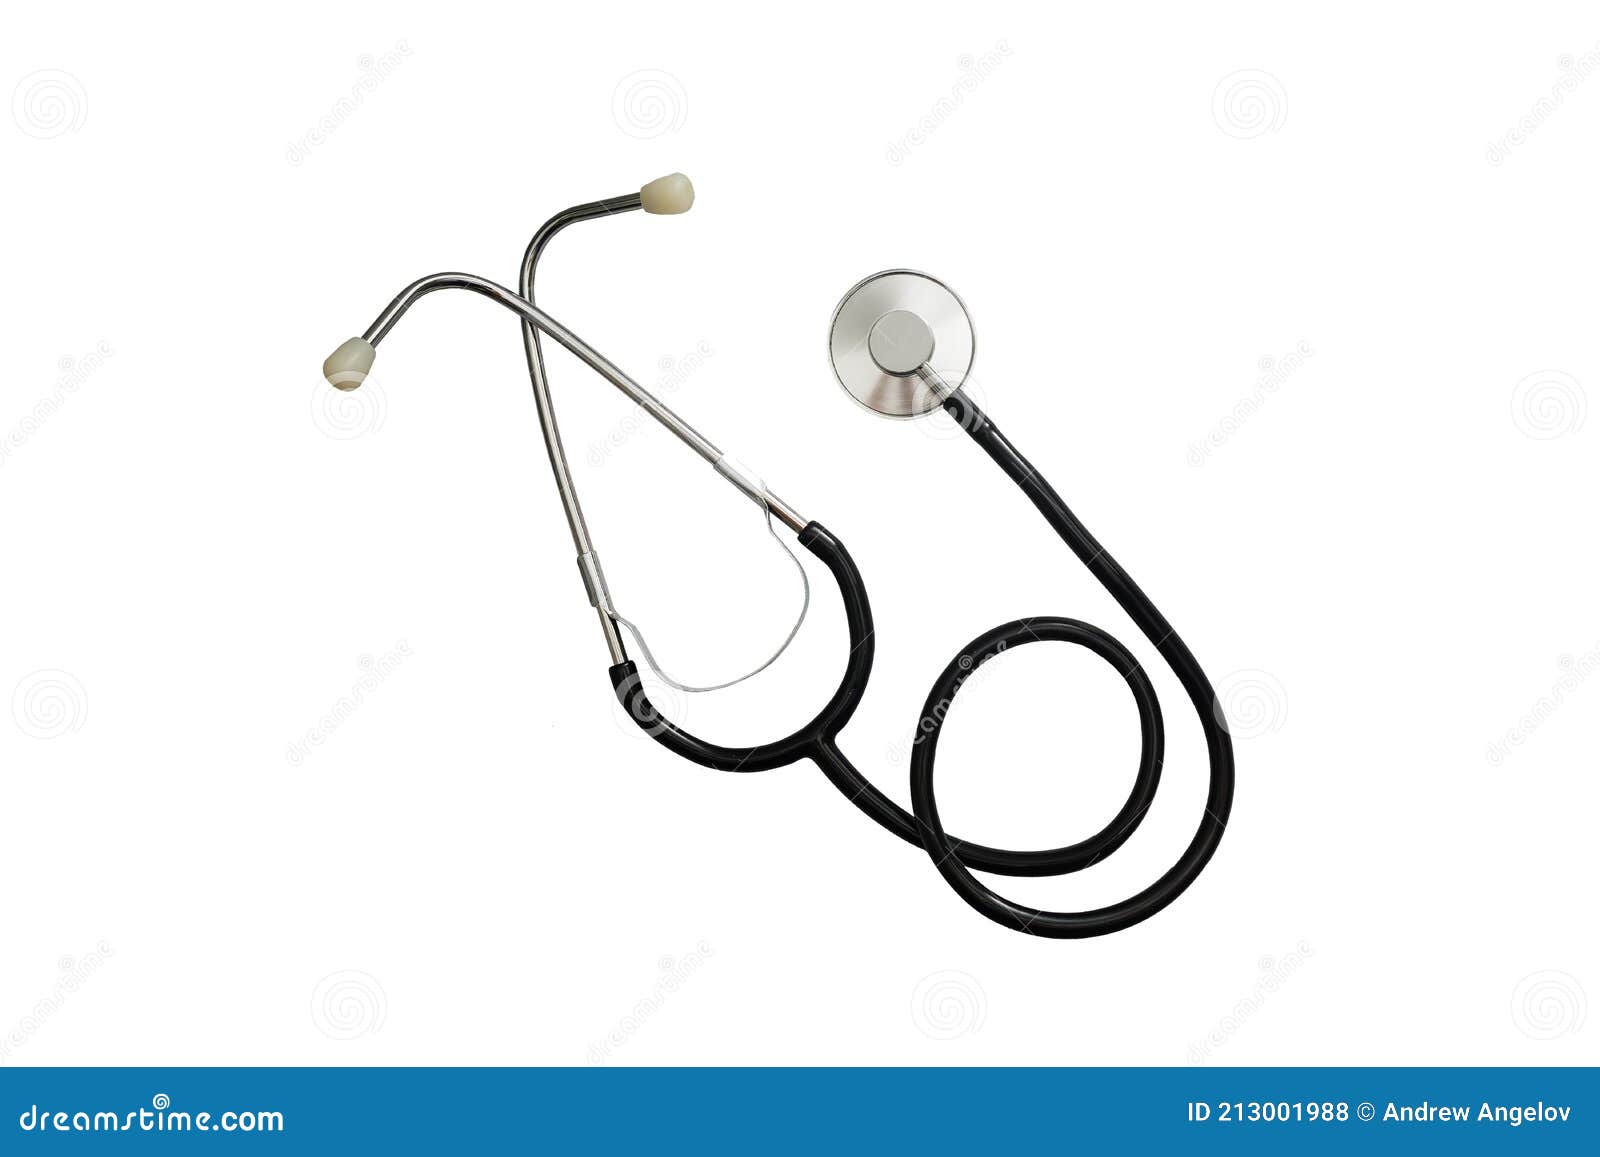 sthetoscope  over a white background. medical instrument for auscultation